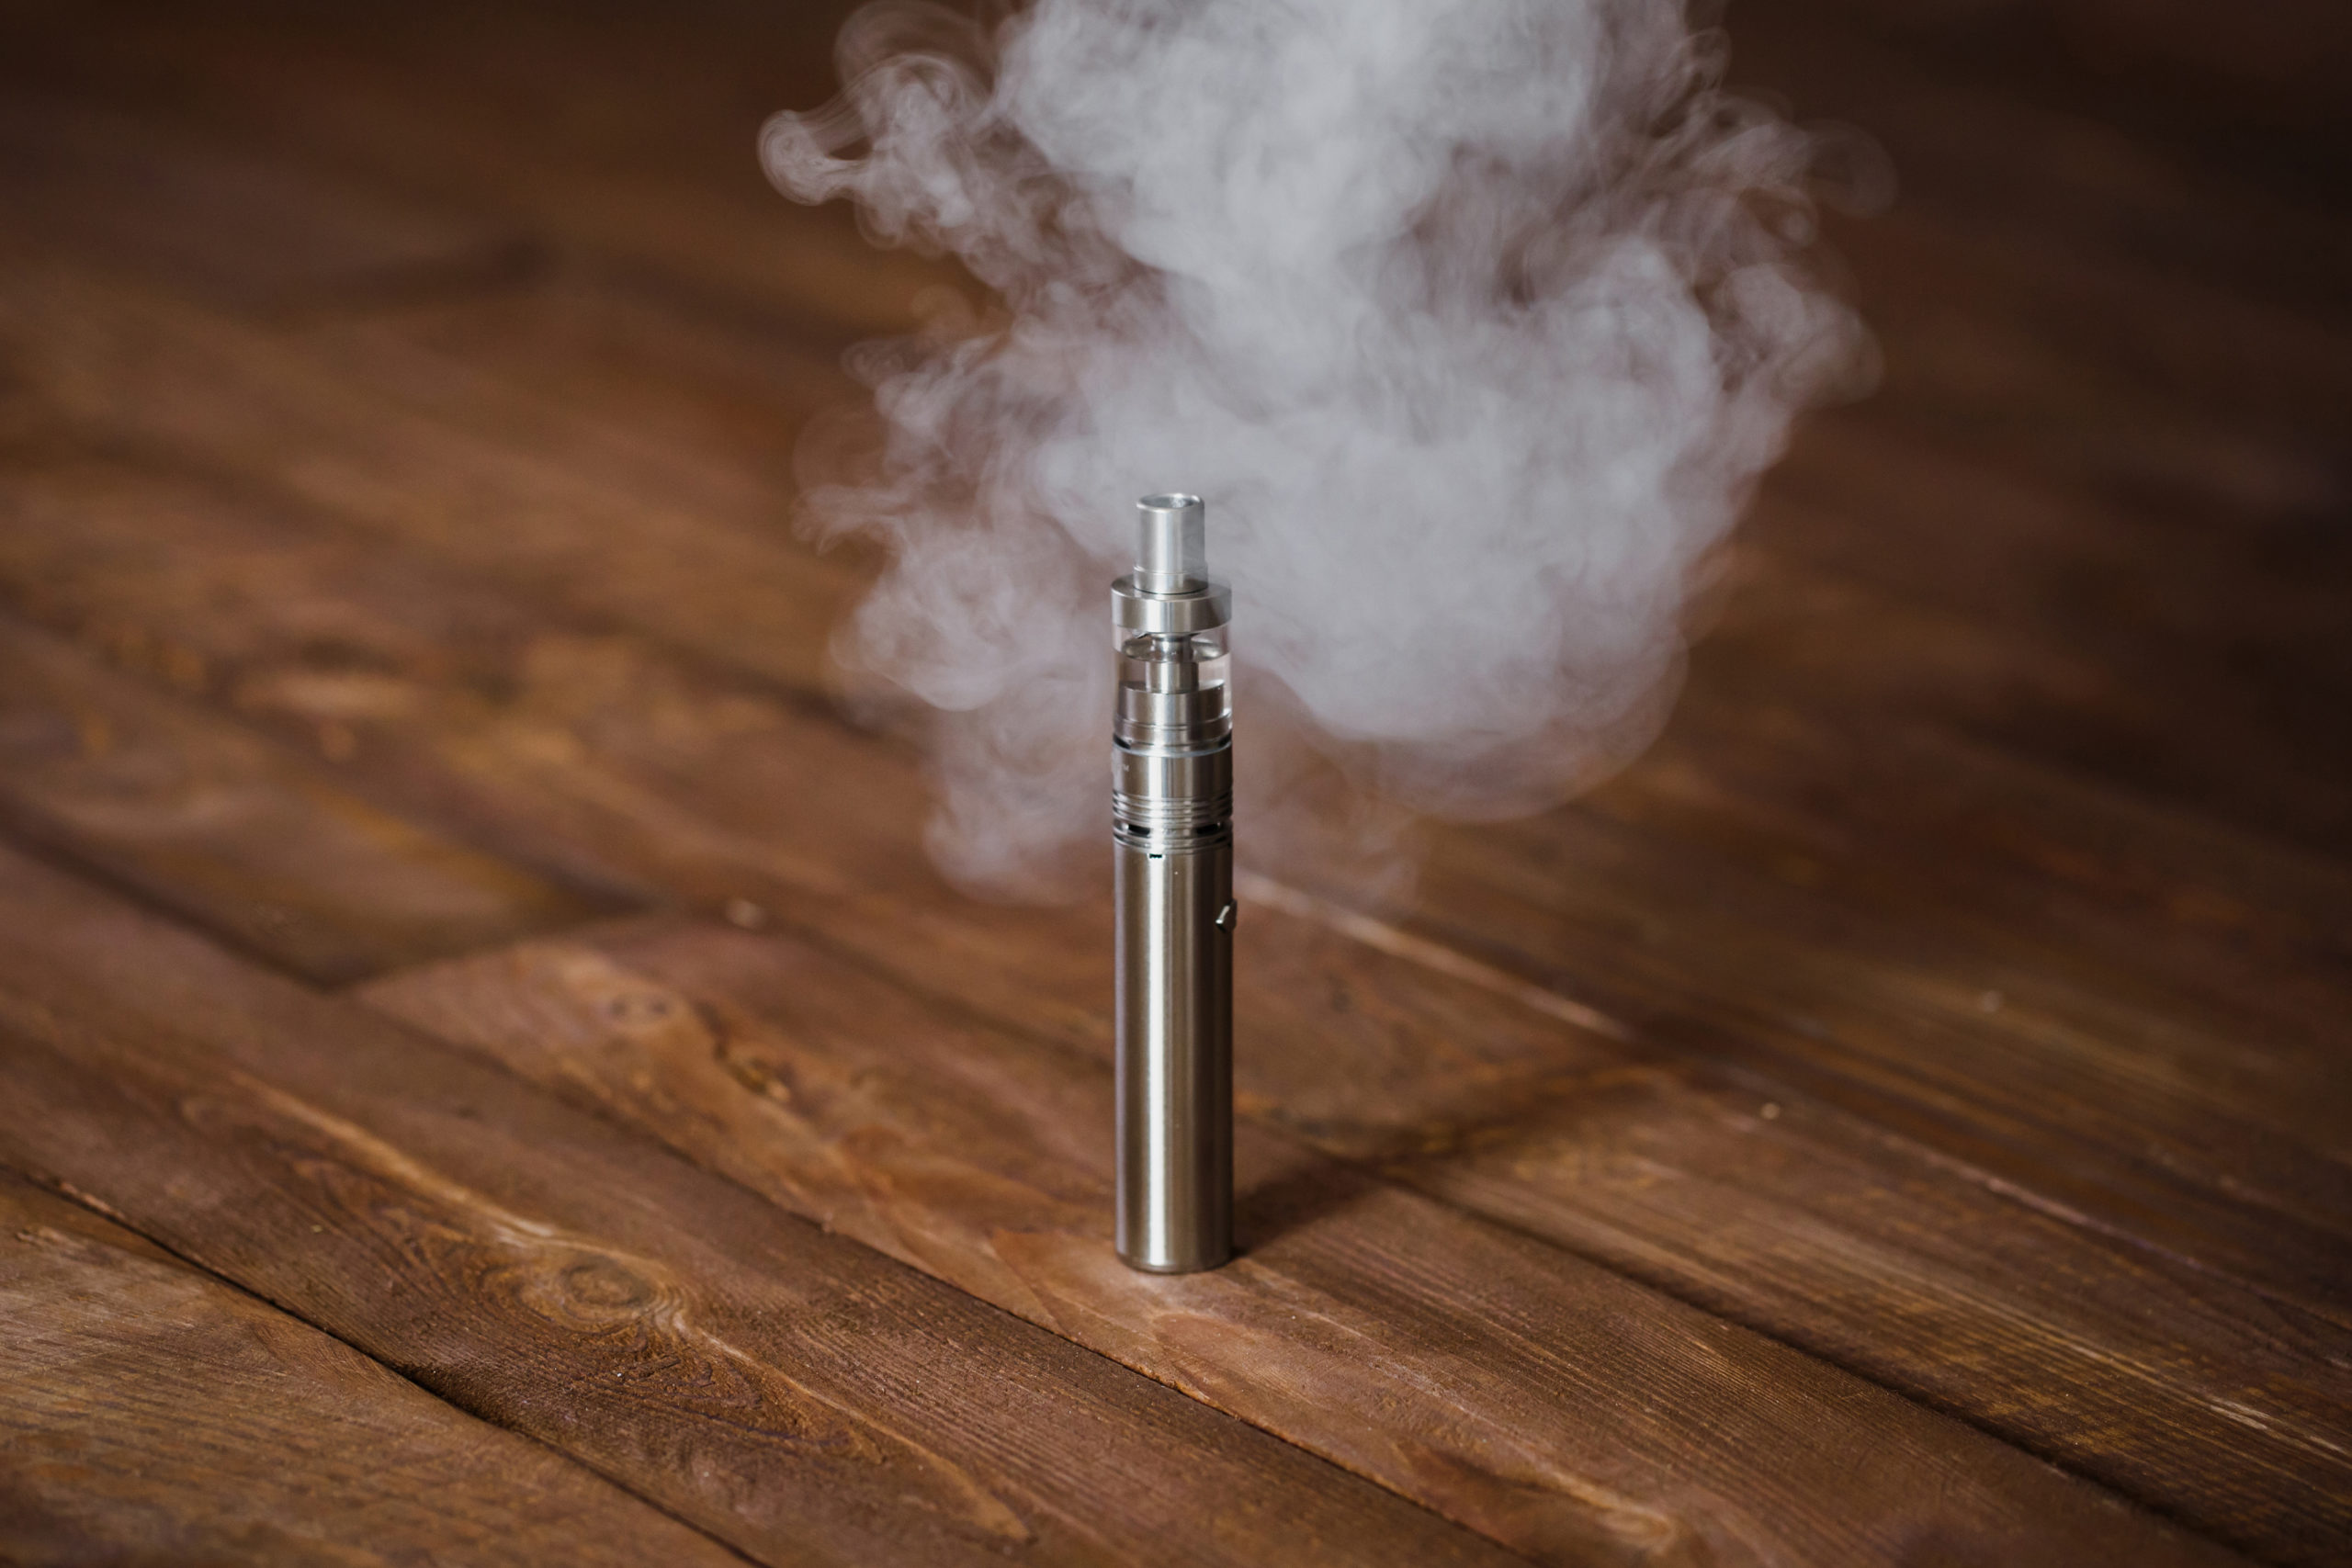 Electronic cigarette or an E-cigarette in a wooden table with smoke coming out the top piece and sides